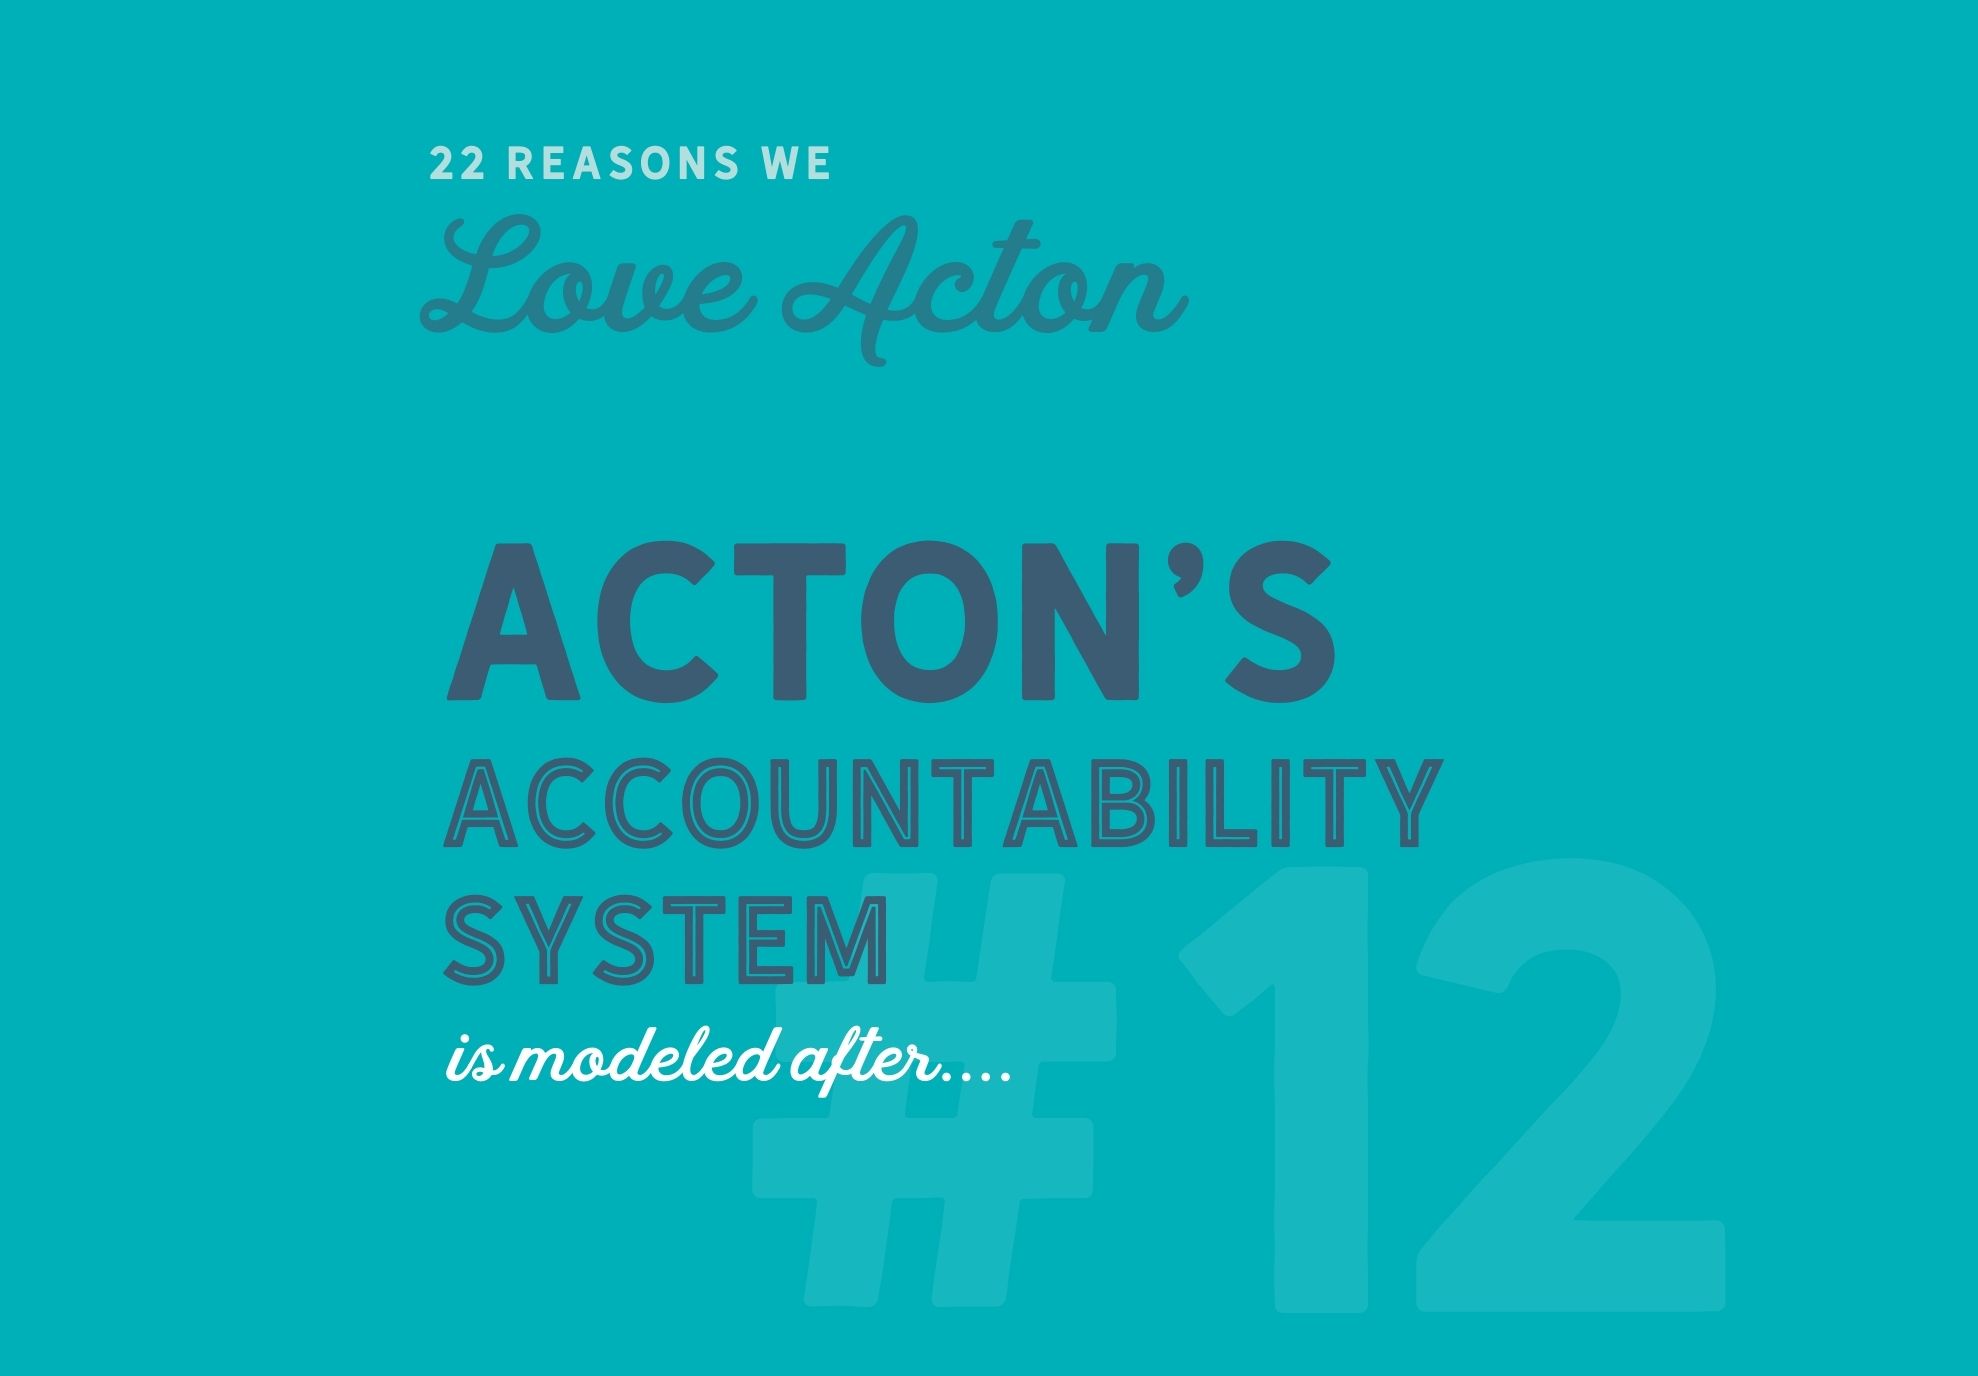 #12 Acton's Accountability System is Modeled After